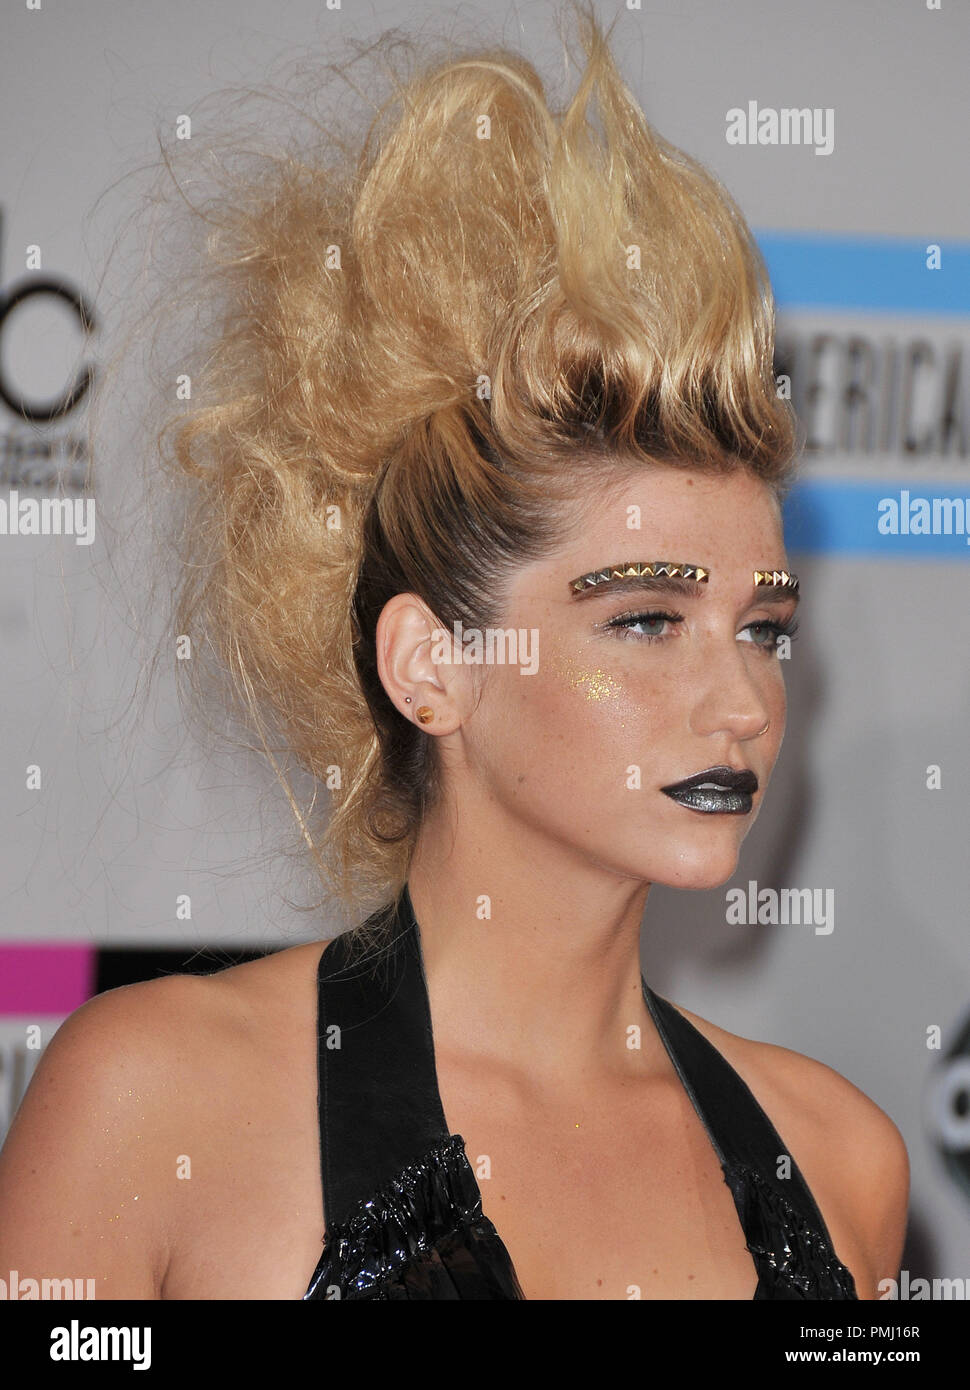 Ke$ha at the 2010 American Music Awards - Arrivals held at the Nokia Theatre L.A. Live in Los Angeles, CA. The event took place on Sunday, November 21, 2010. Photo by PRPP Pacific Rim Photo Press. File Reference # 30722 207PLX   For Editorial Use Only -  All Rights Reserved Stock Photo